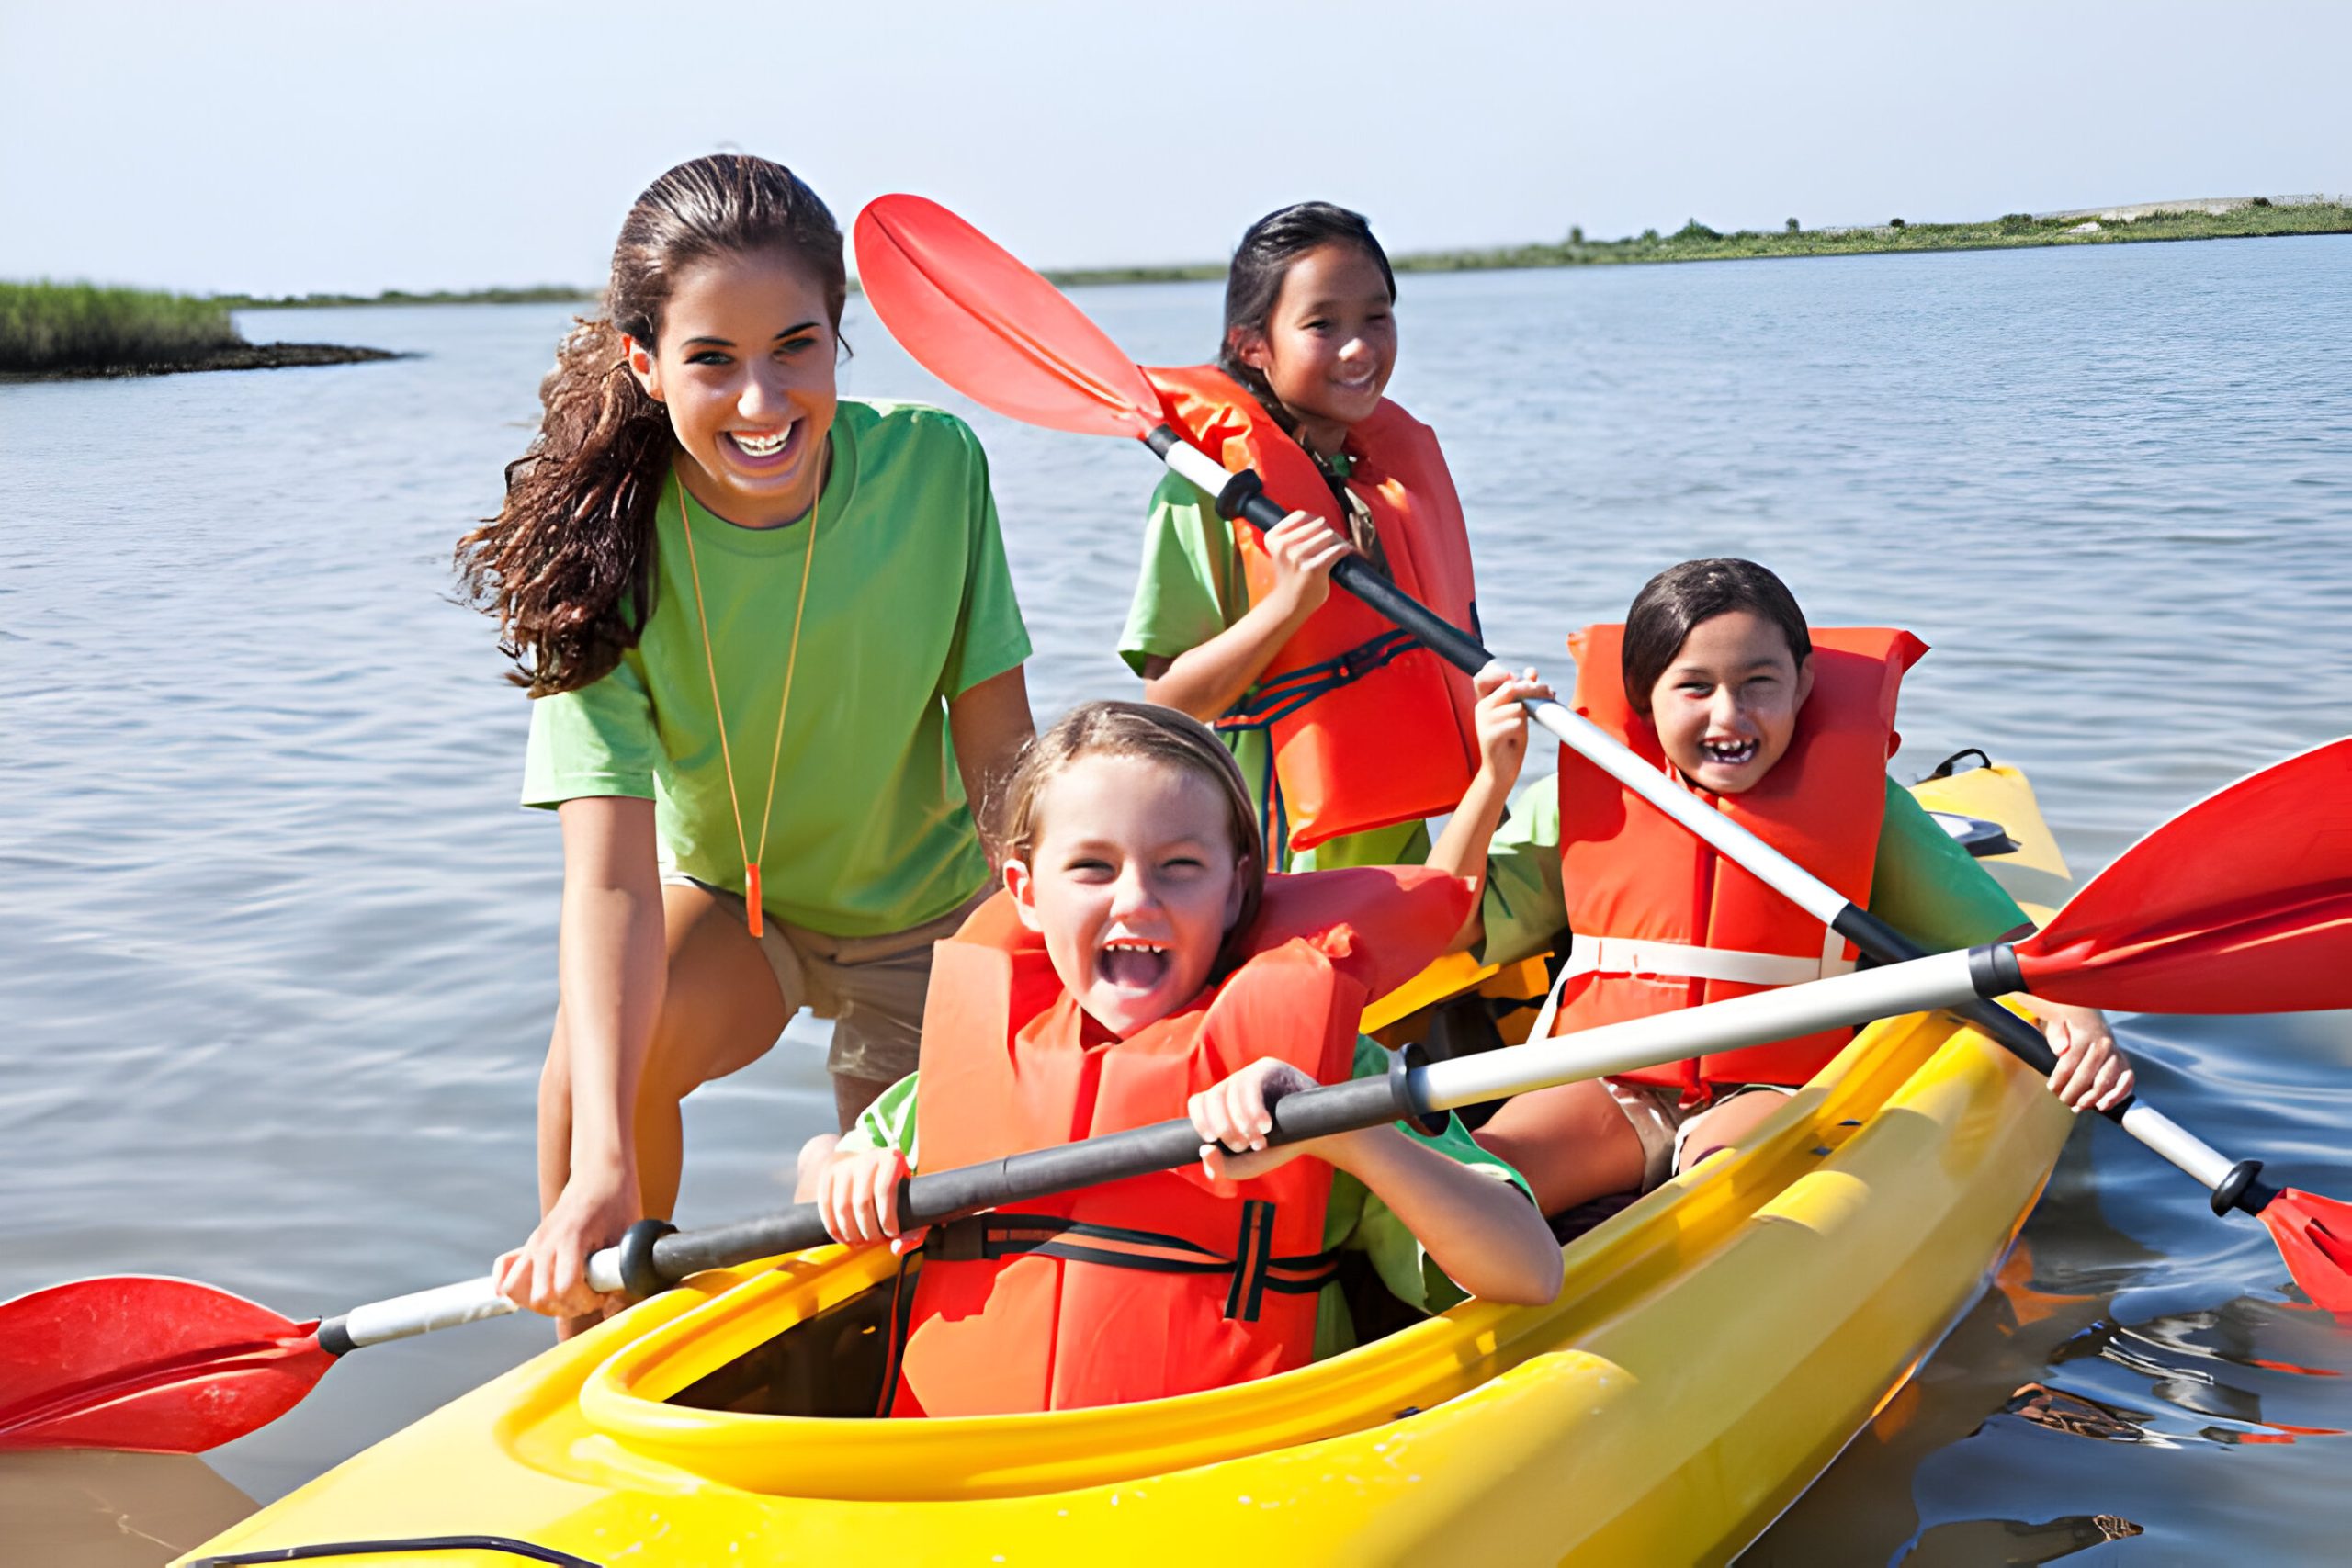 Get Your Kids Ready for a Safe and Fun Free Summer Camp!